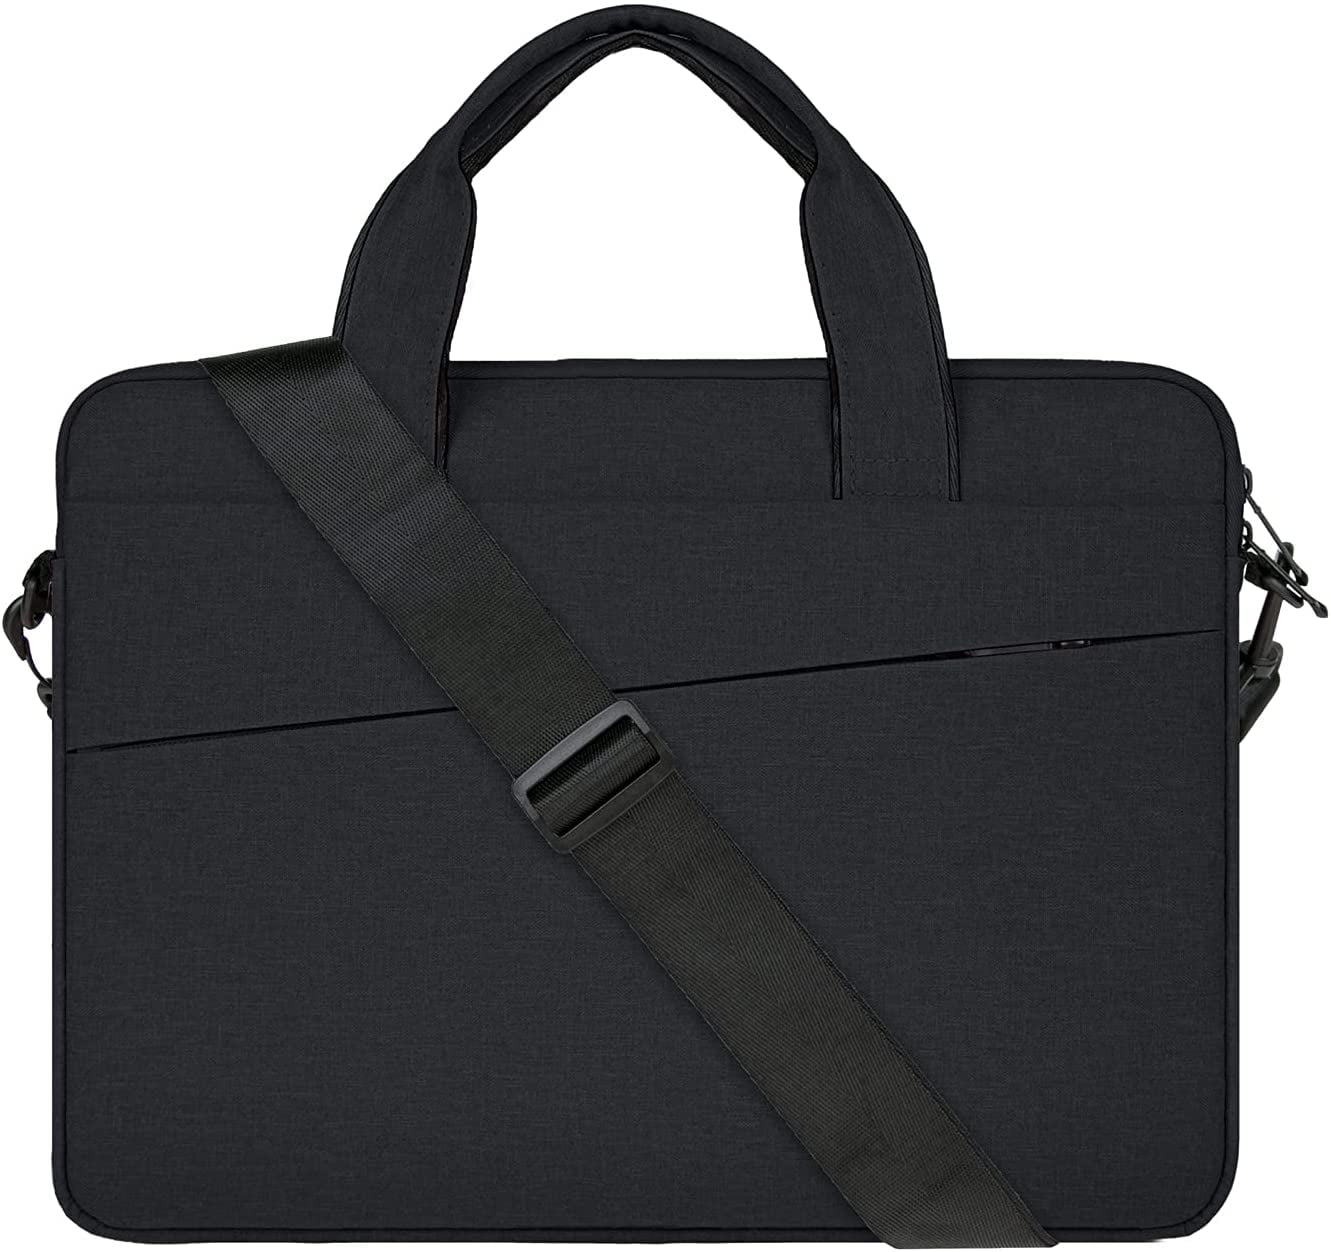 Unty to-by Ke-ith Work Carry Laptop Shoulder Messenger Bag Case for 15.6/14/13 inch 